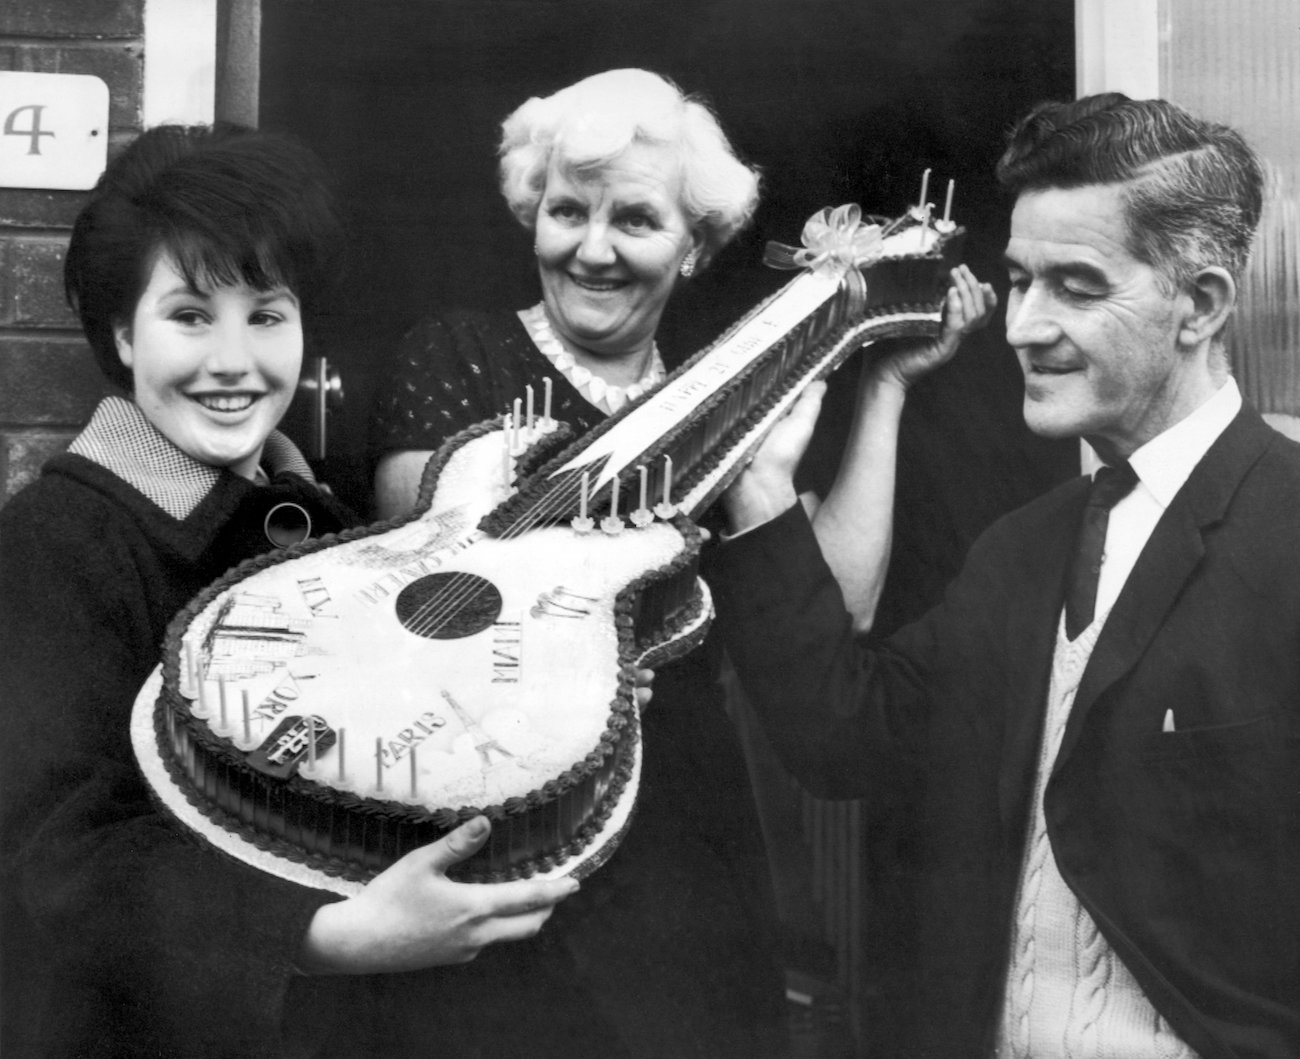 A fan presenting George Harrison's parents, Louise and Harold, with a cake for their son's 21st birthday in 1964.